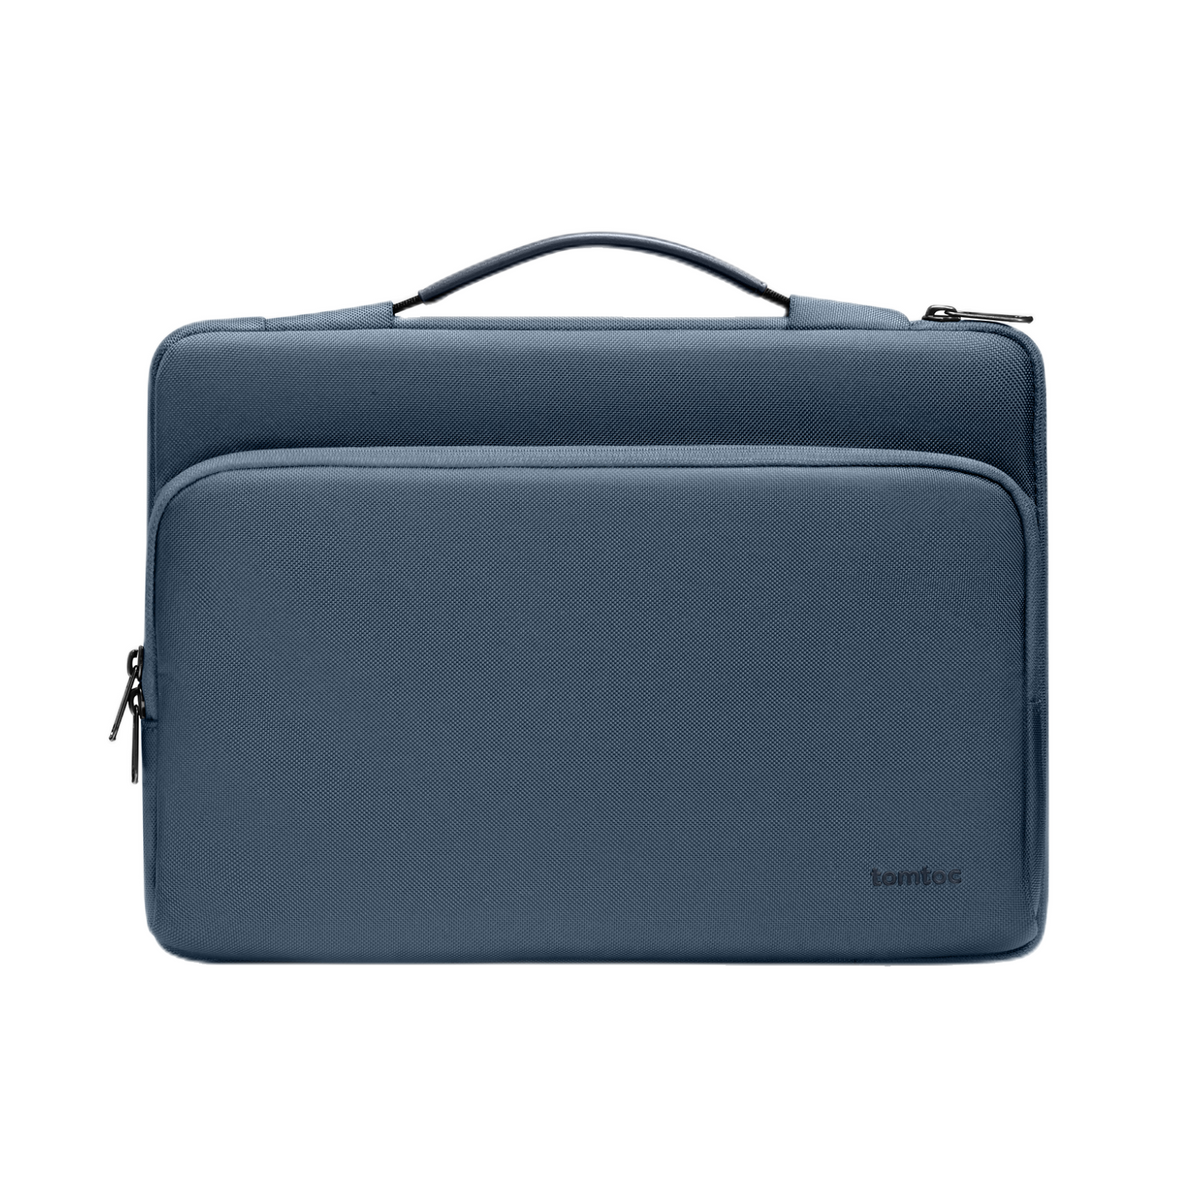 primary_Defender-A14 Laptop Sleeve For 13-inch New MacBook Pro & Air